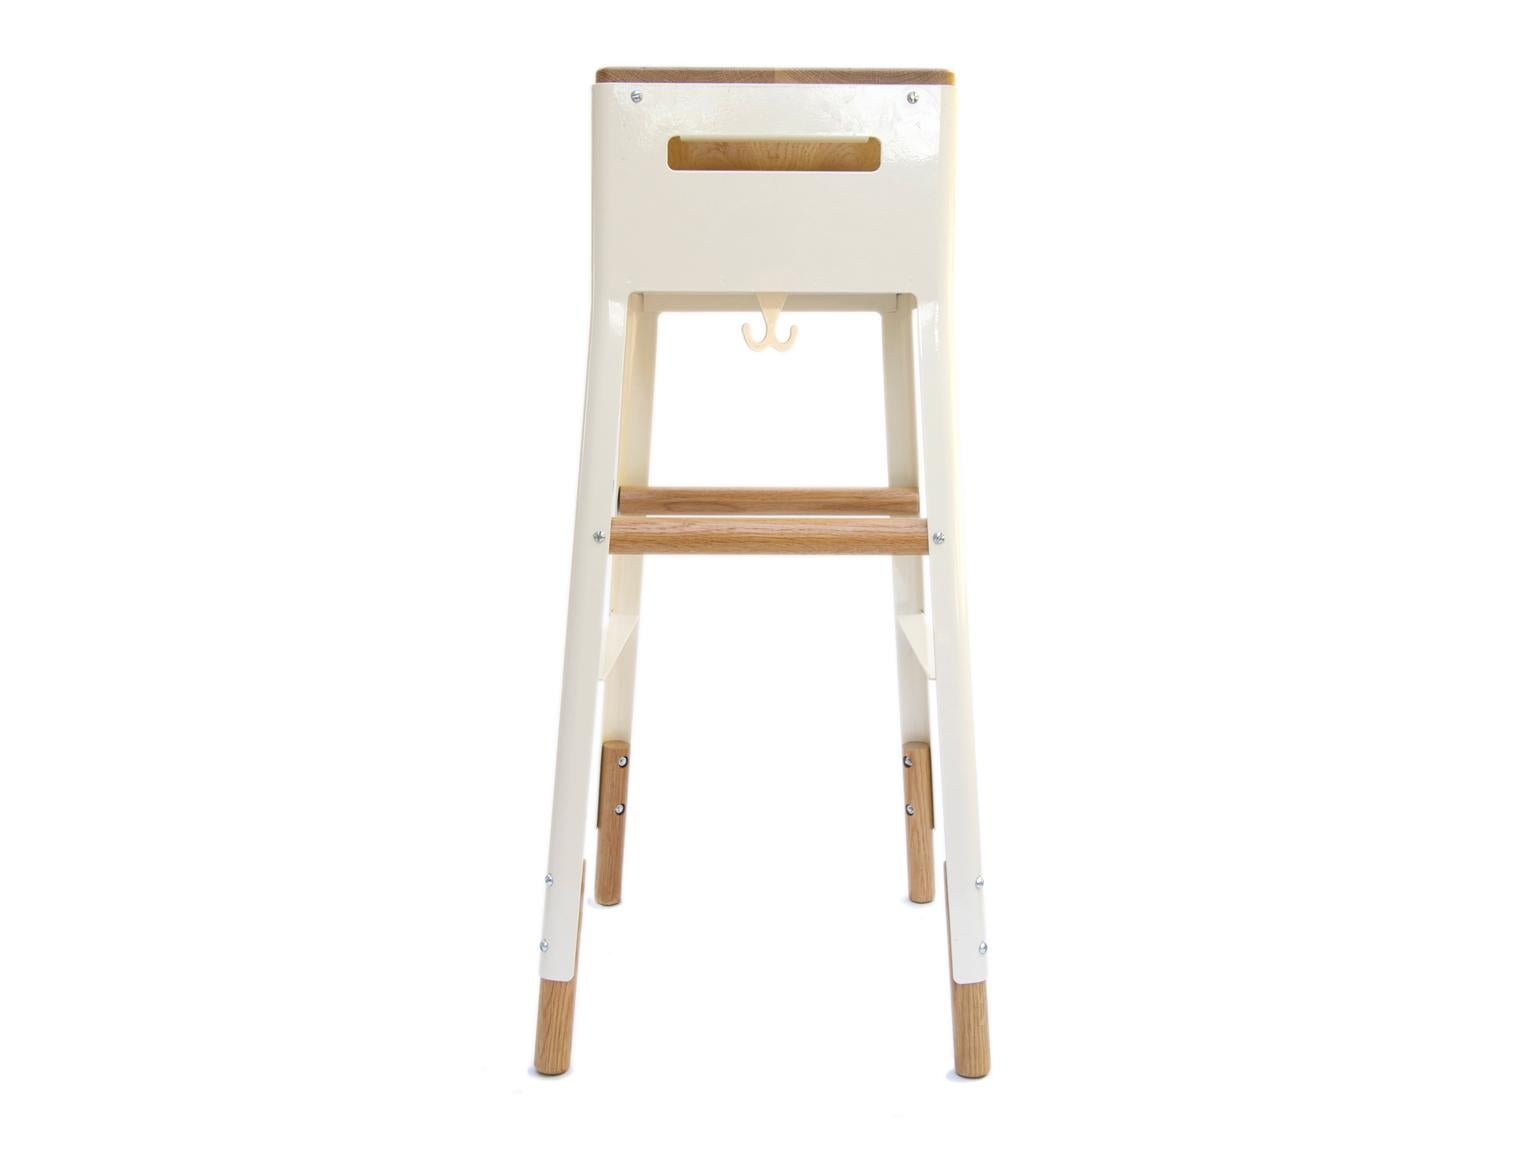 The Scout Regalia Ranger Stool is made of white oak hardwood and powder coated steel.  At 30” high, the Tall Ranger Stool is made for commercial countertops and bars, and available in custom colors (minimum order required). Made in Los Angeles,